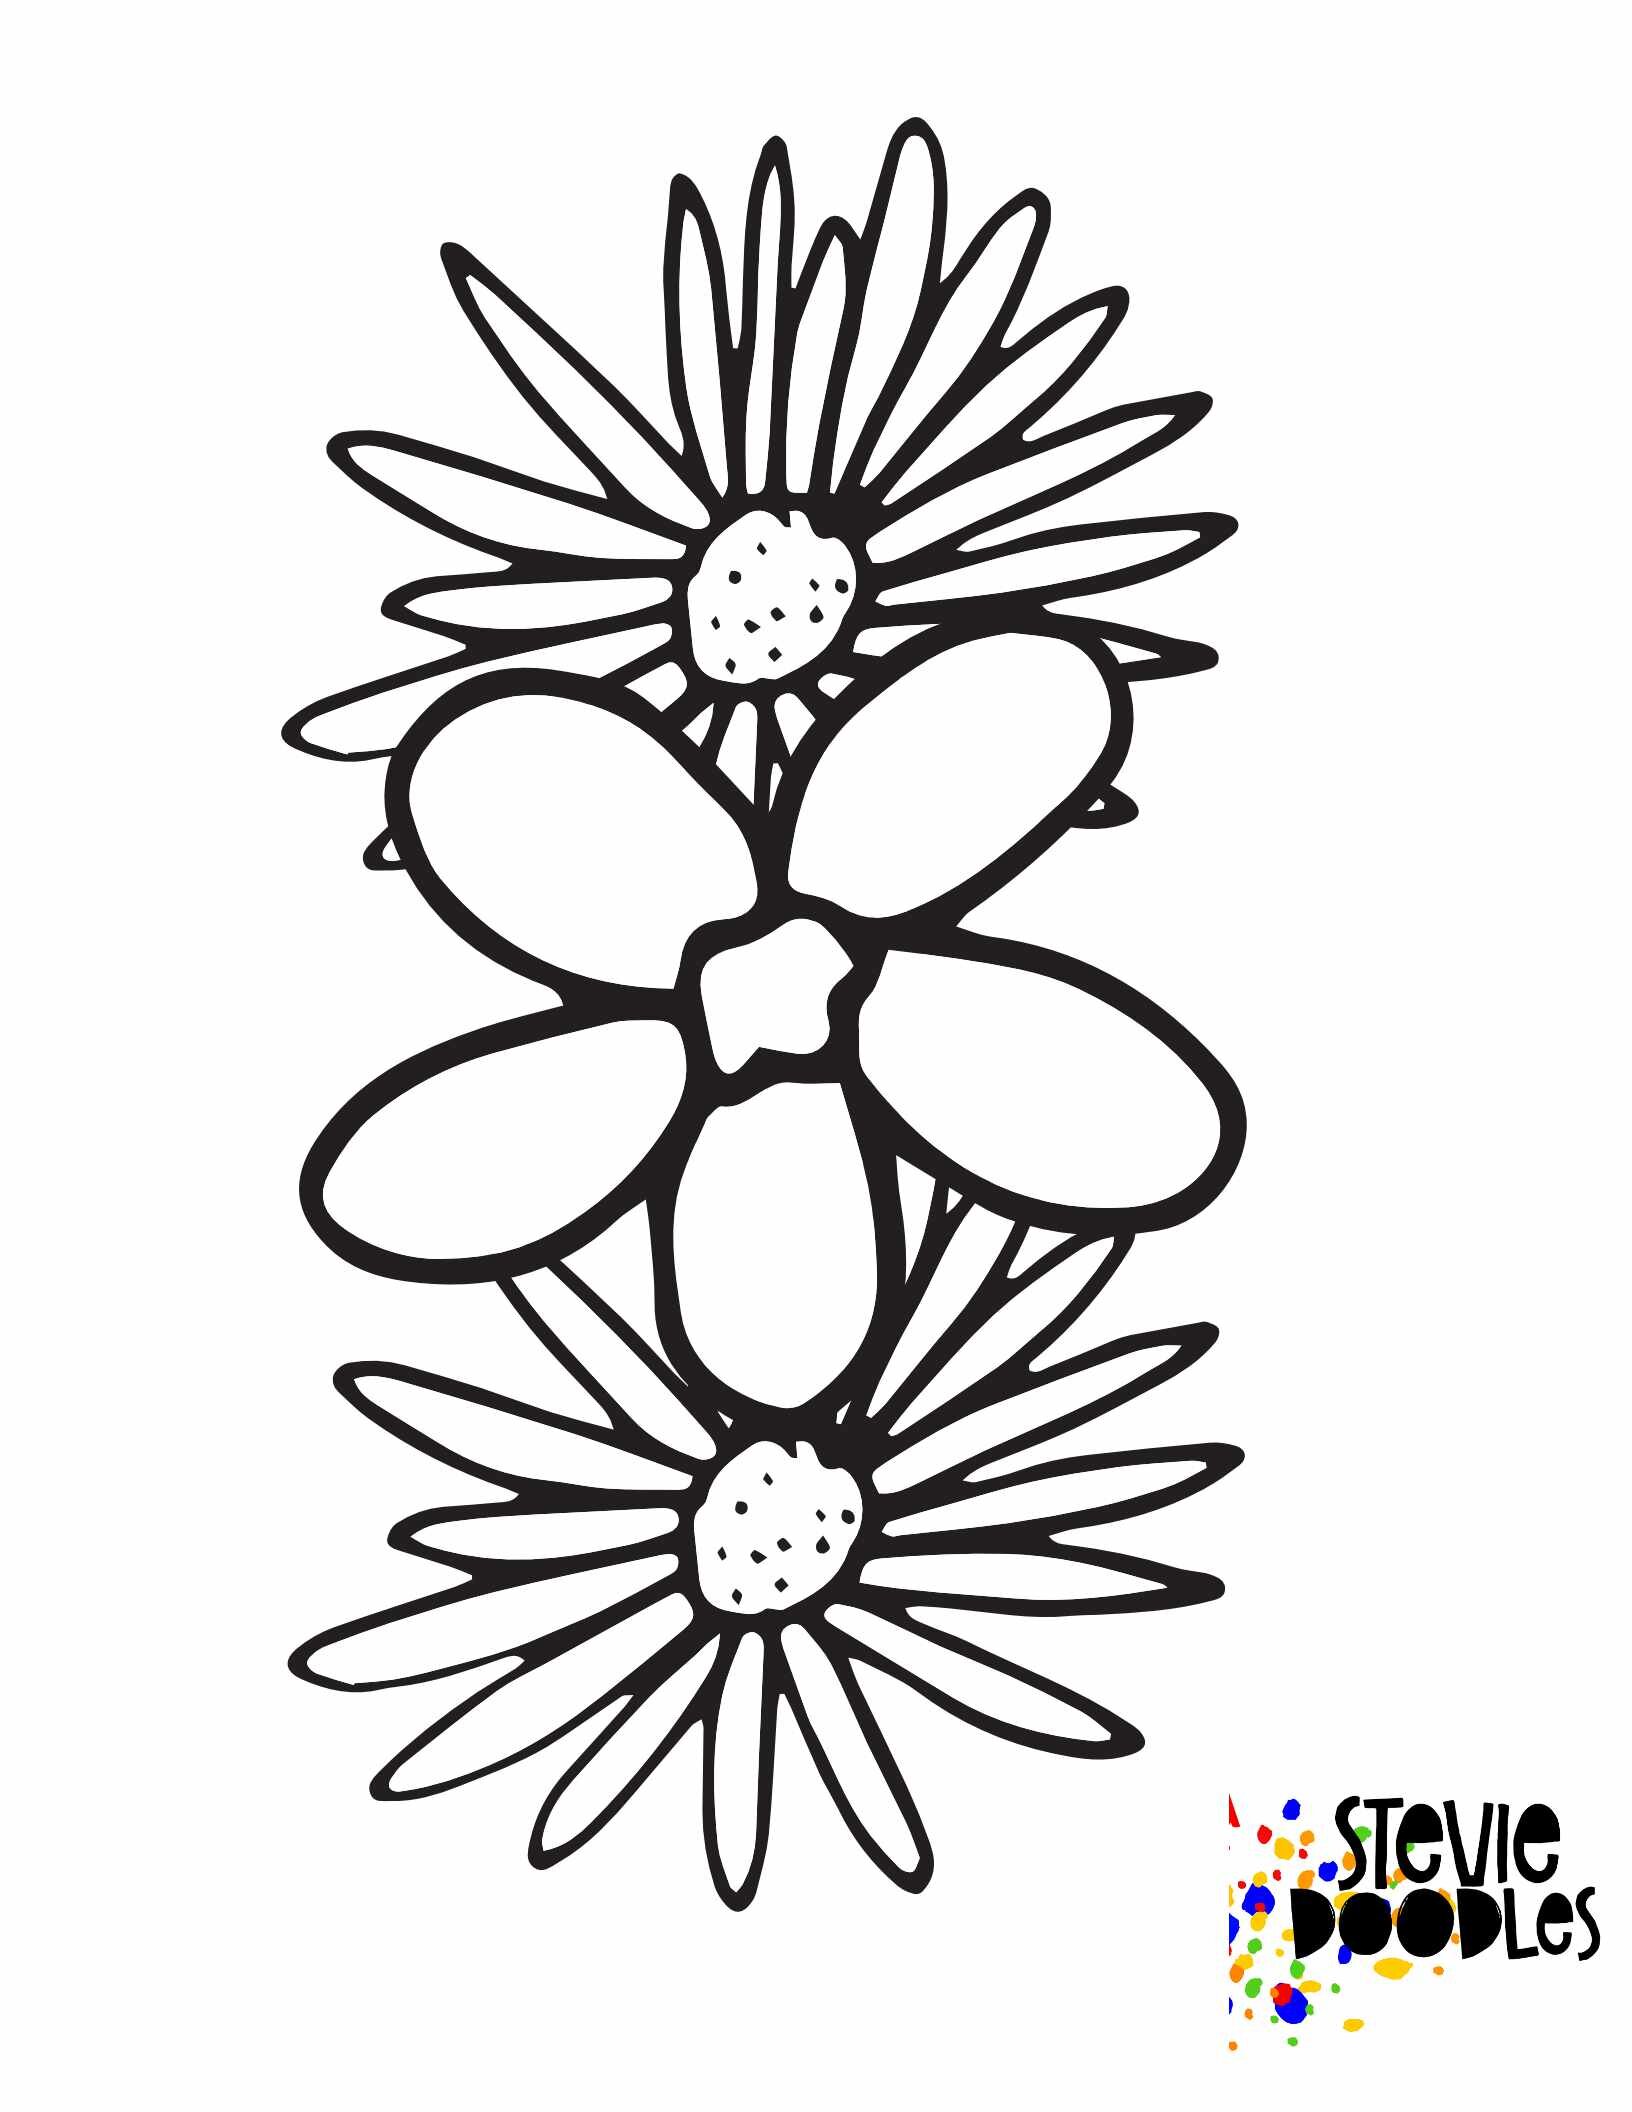 3 overlapping flowers verical on this flower coloring page